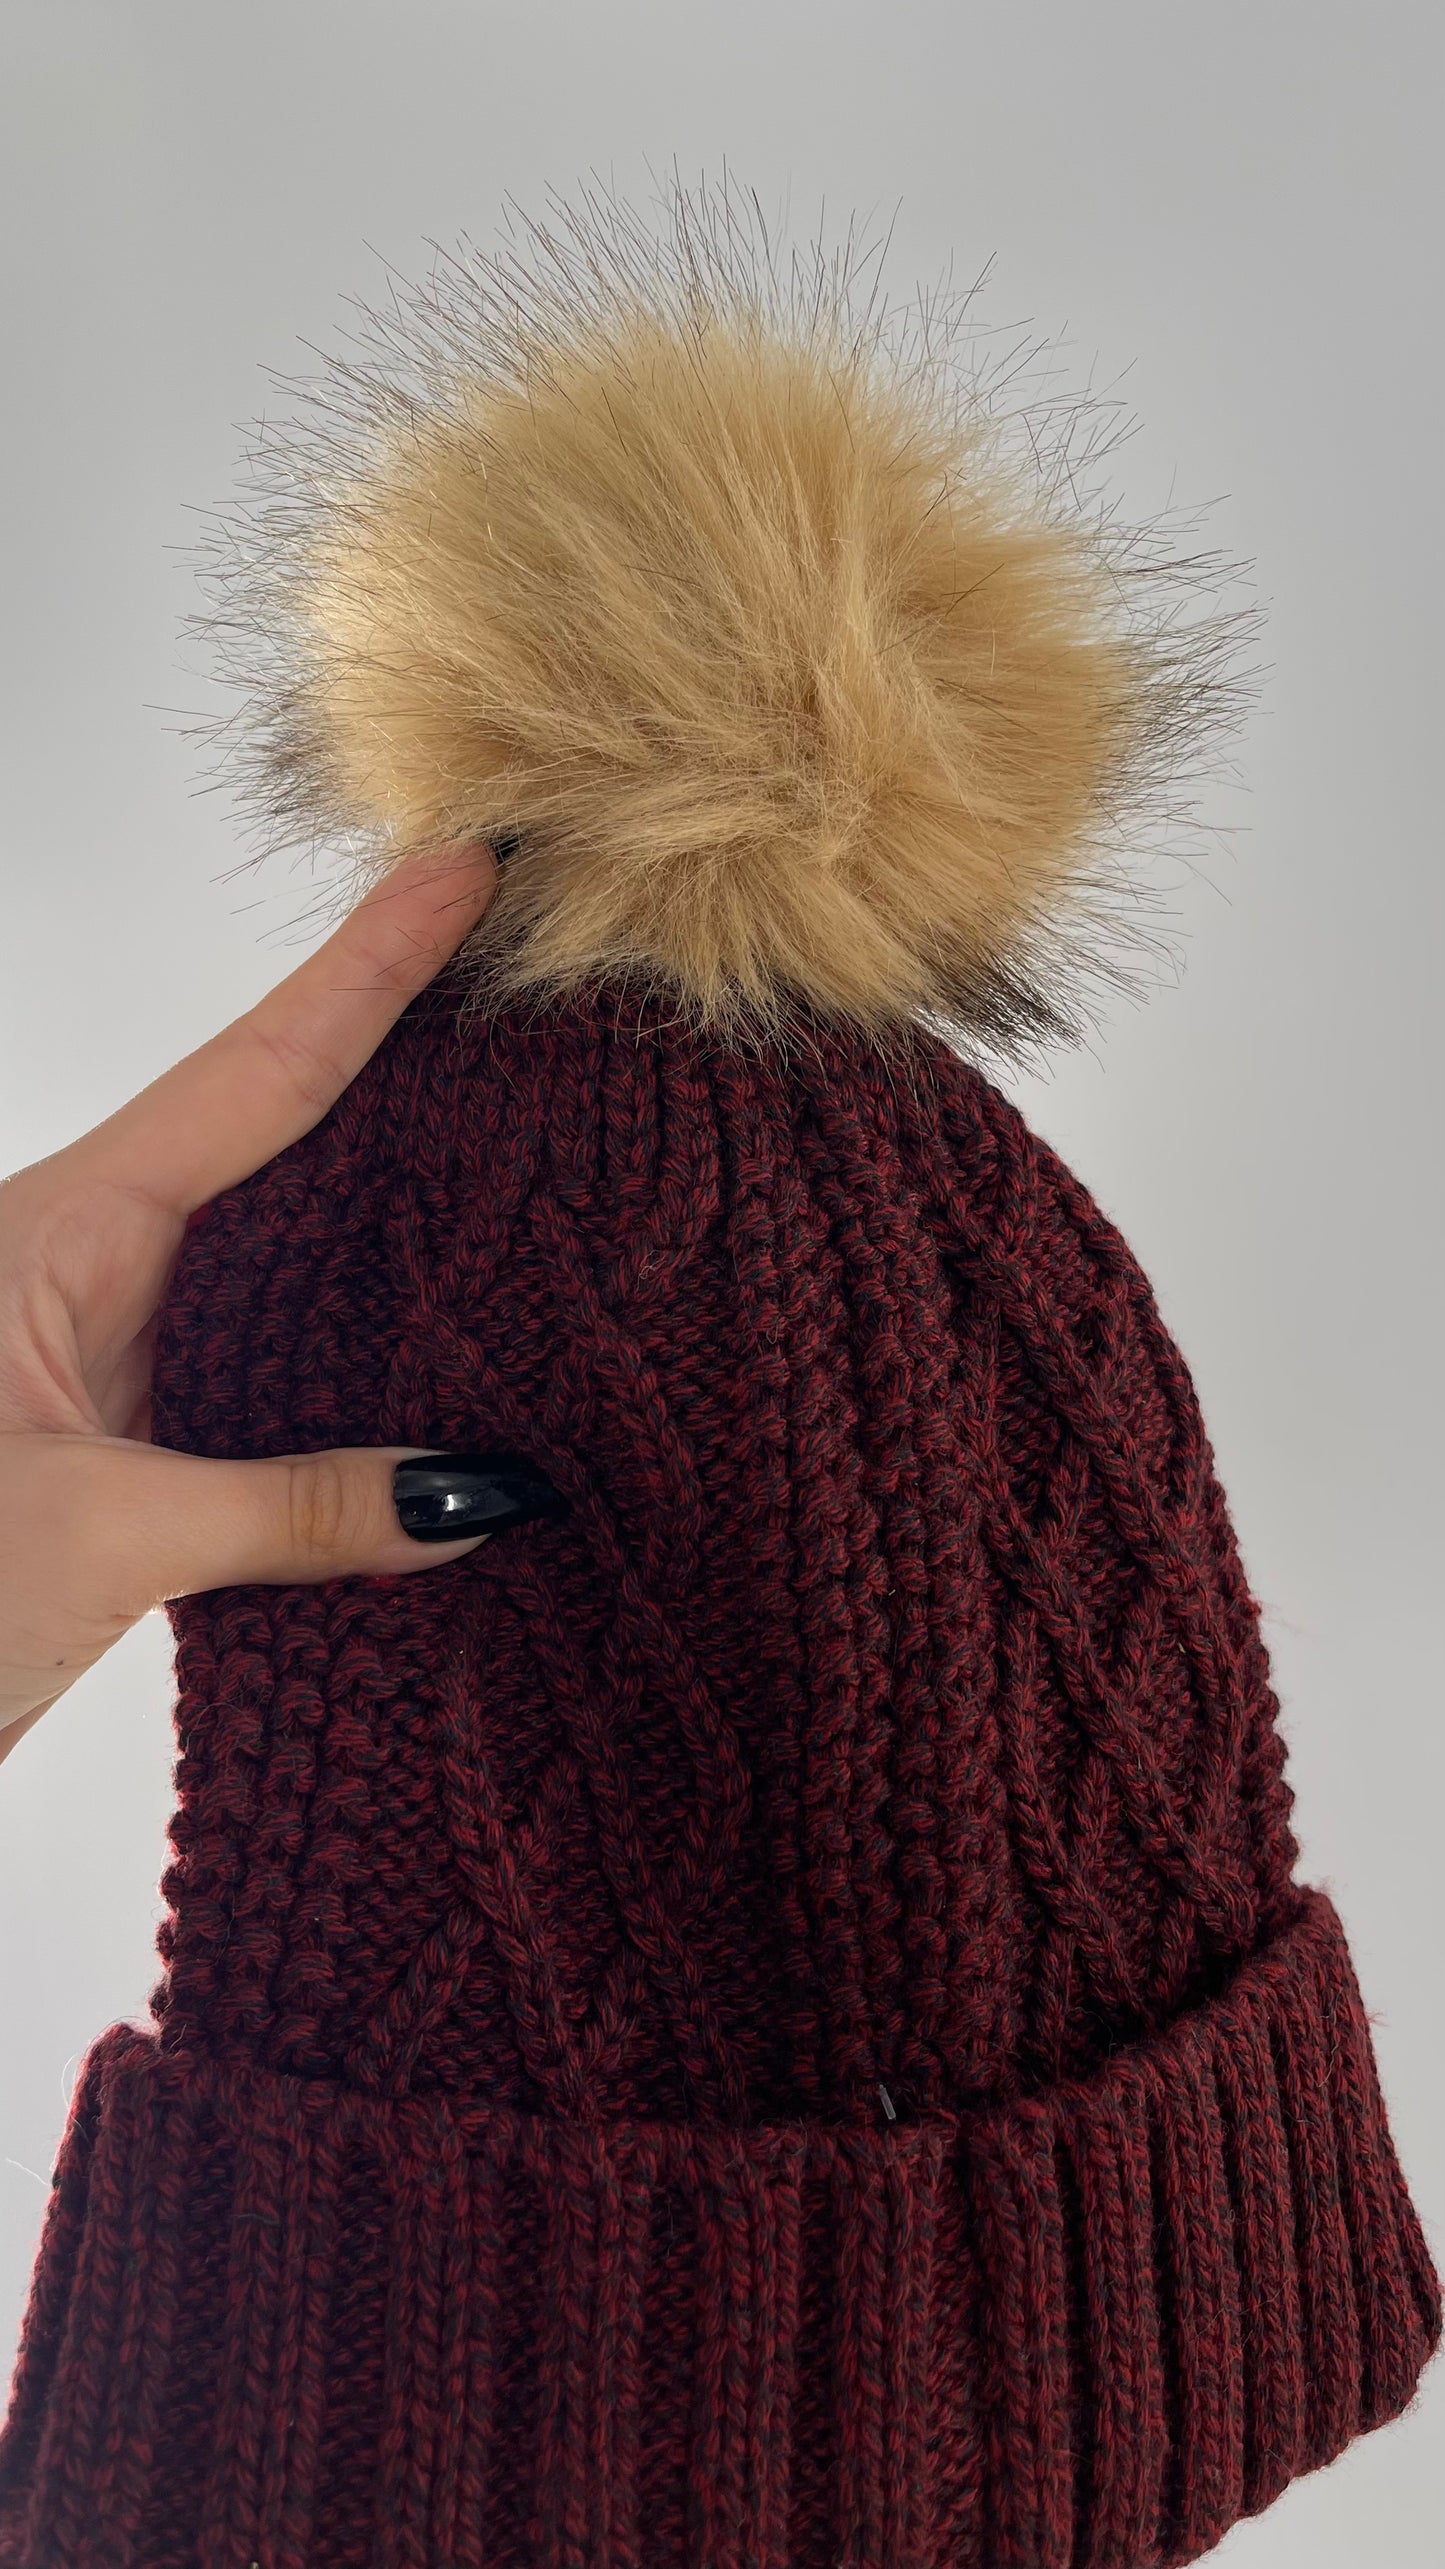 Urban Outfitters Burgundy Knit Beanie with Tan Faux Fur Pom